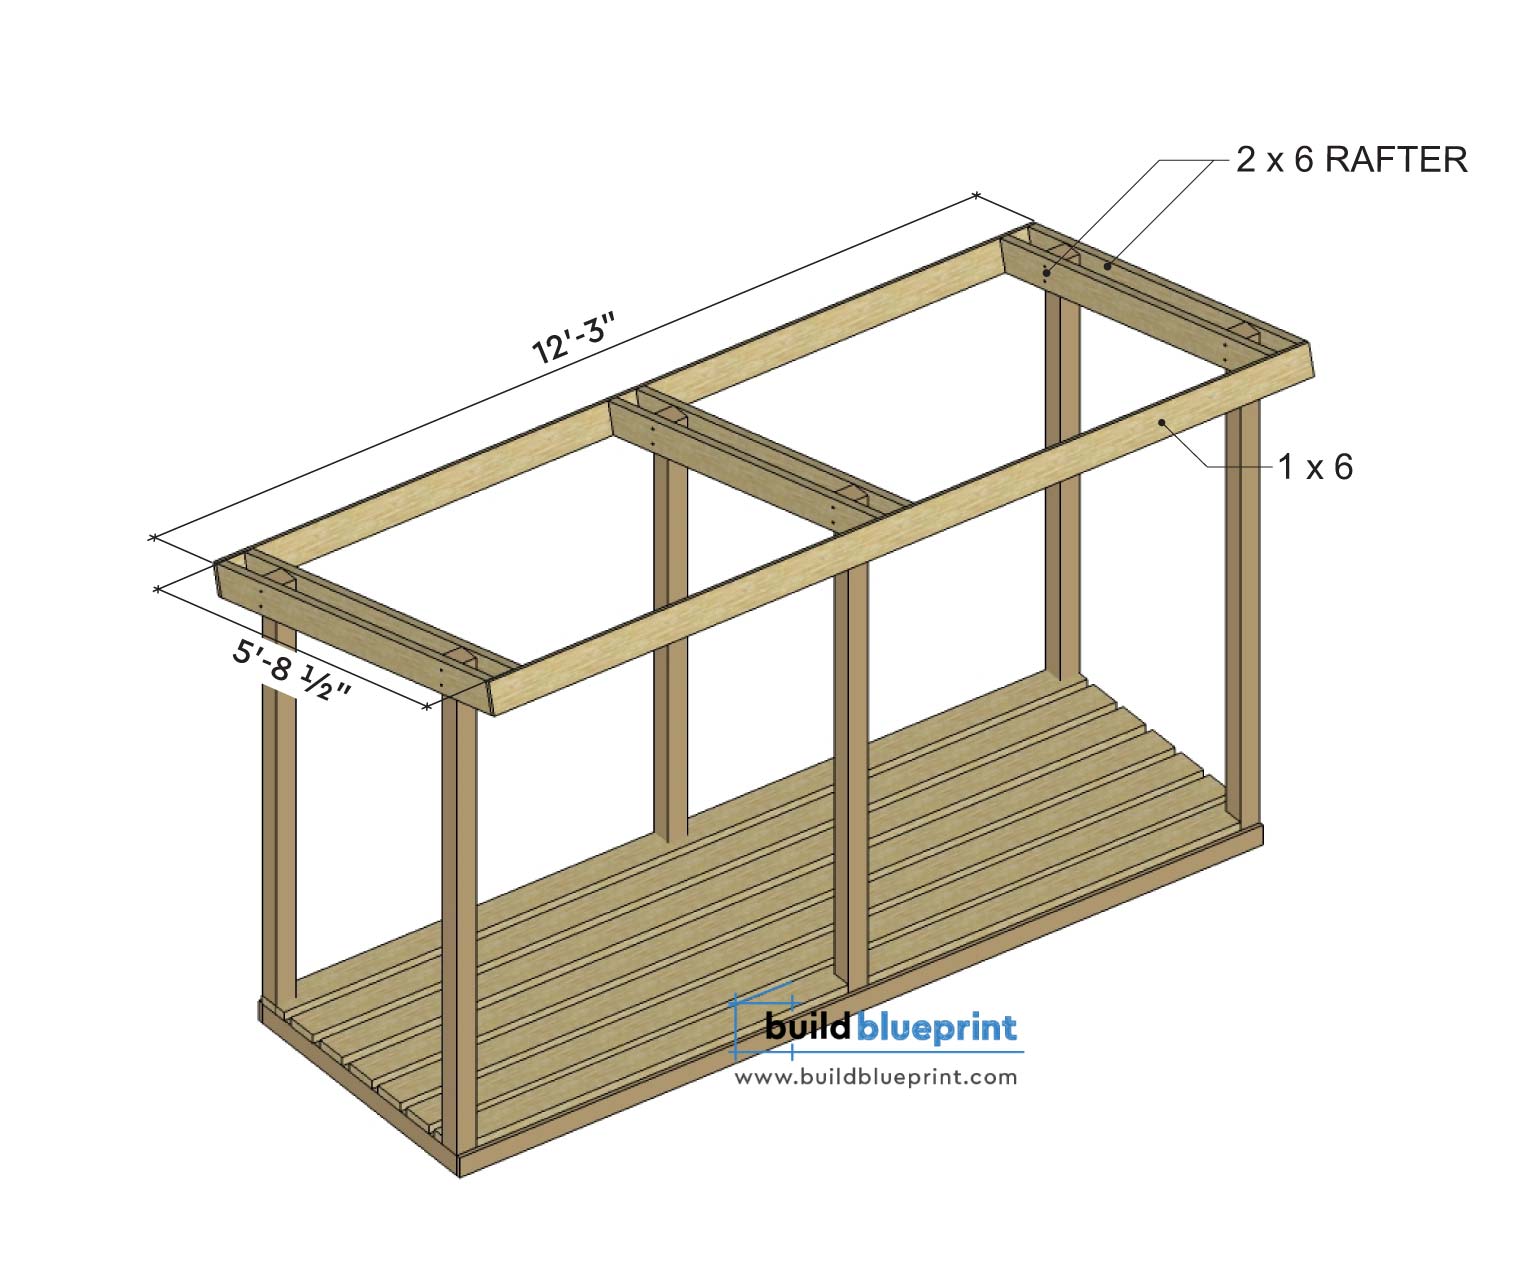 4x12 firewood shed rafters